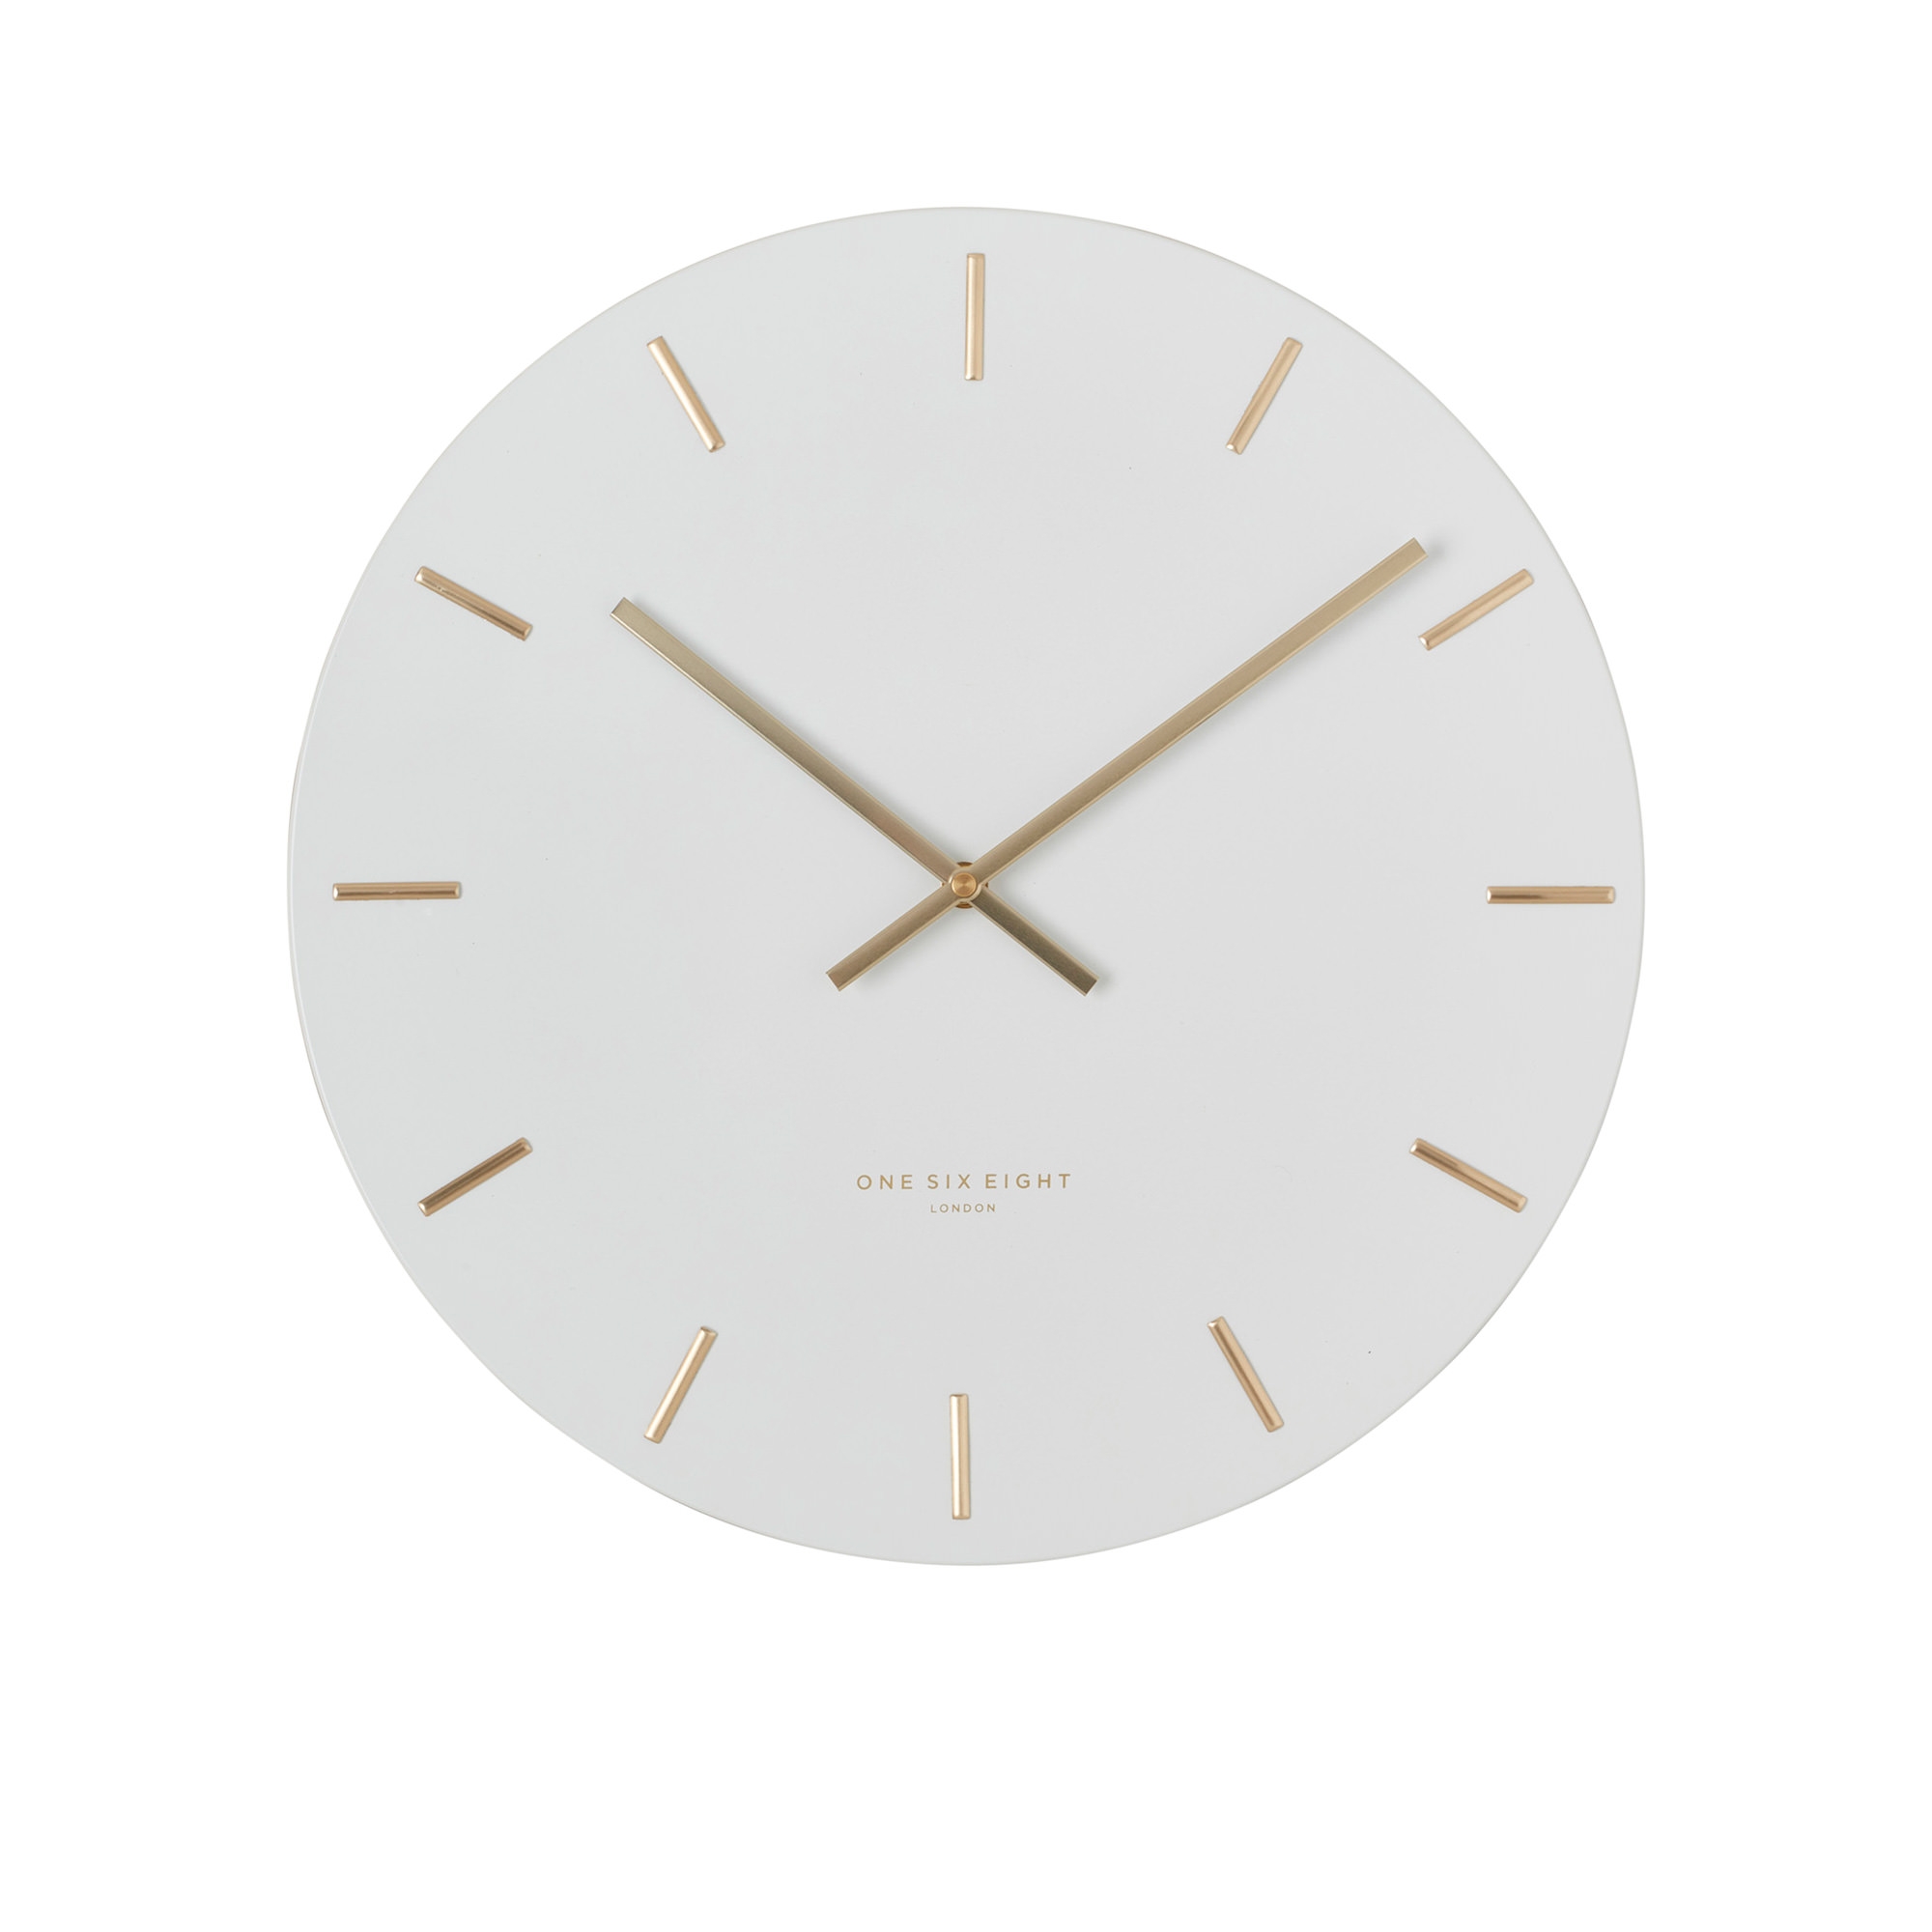 One Six Eight London Luca Silent Wall Clock 30cm White Image 1